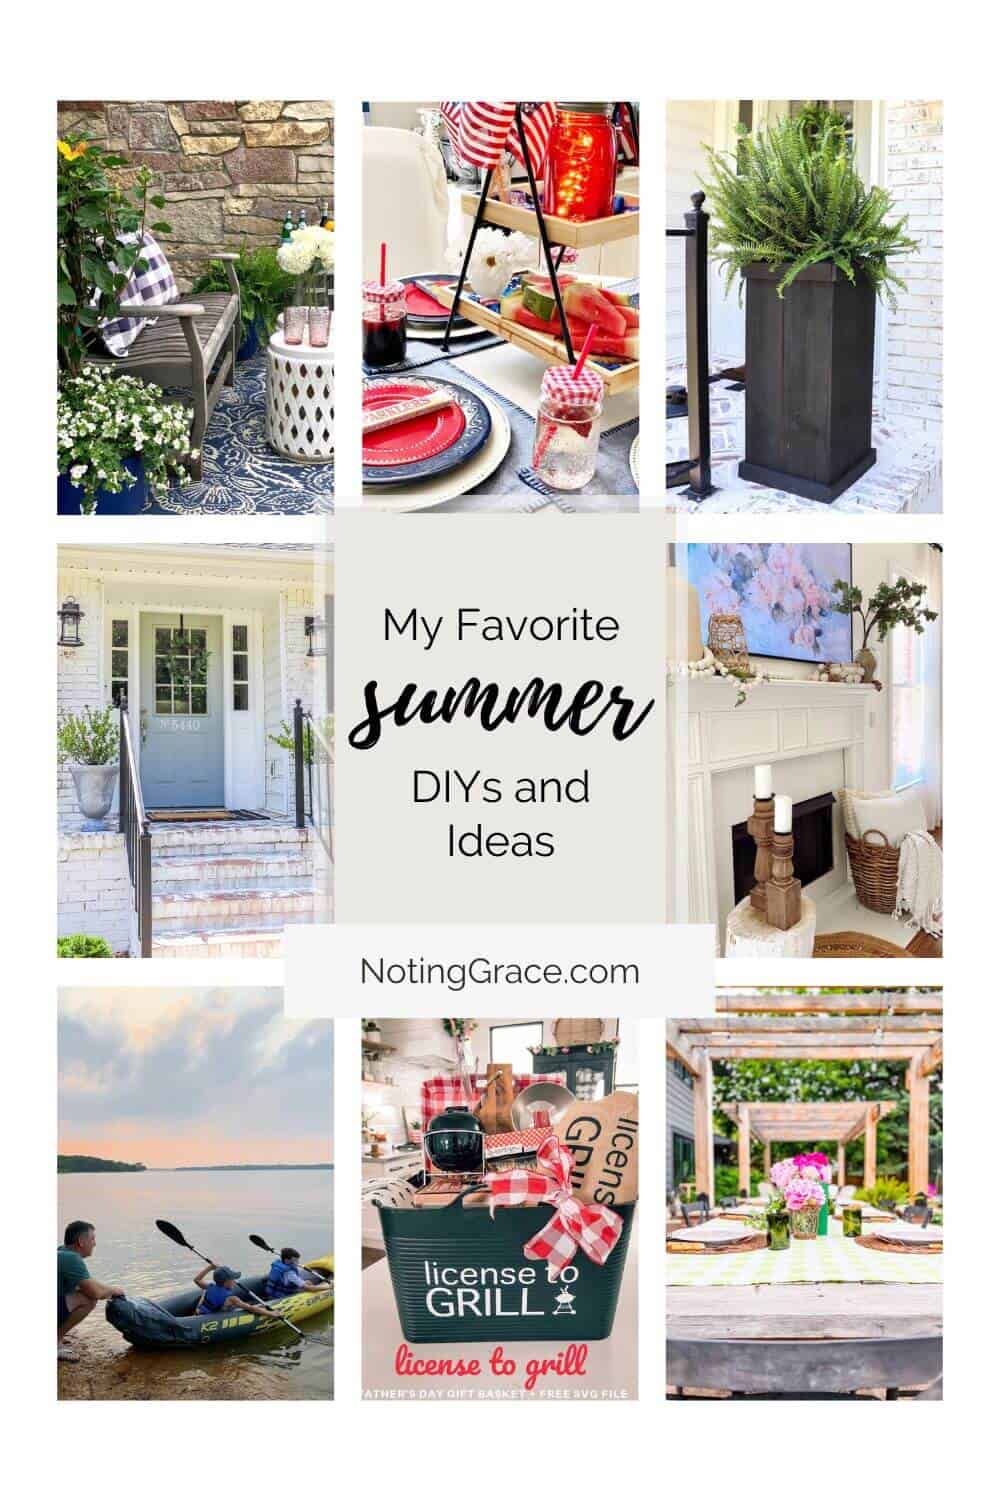 My Favorite Summer and DIY Ideas